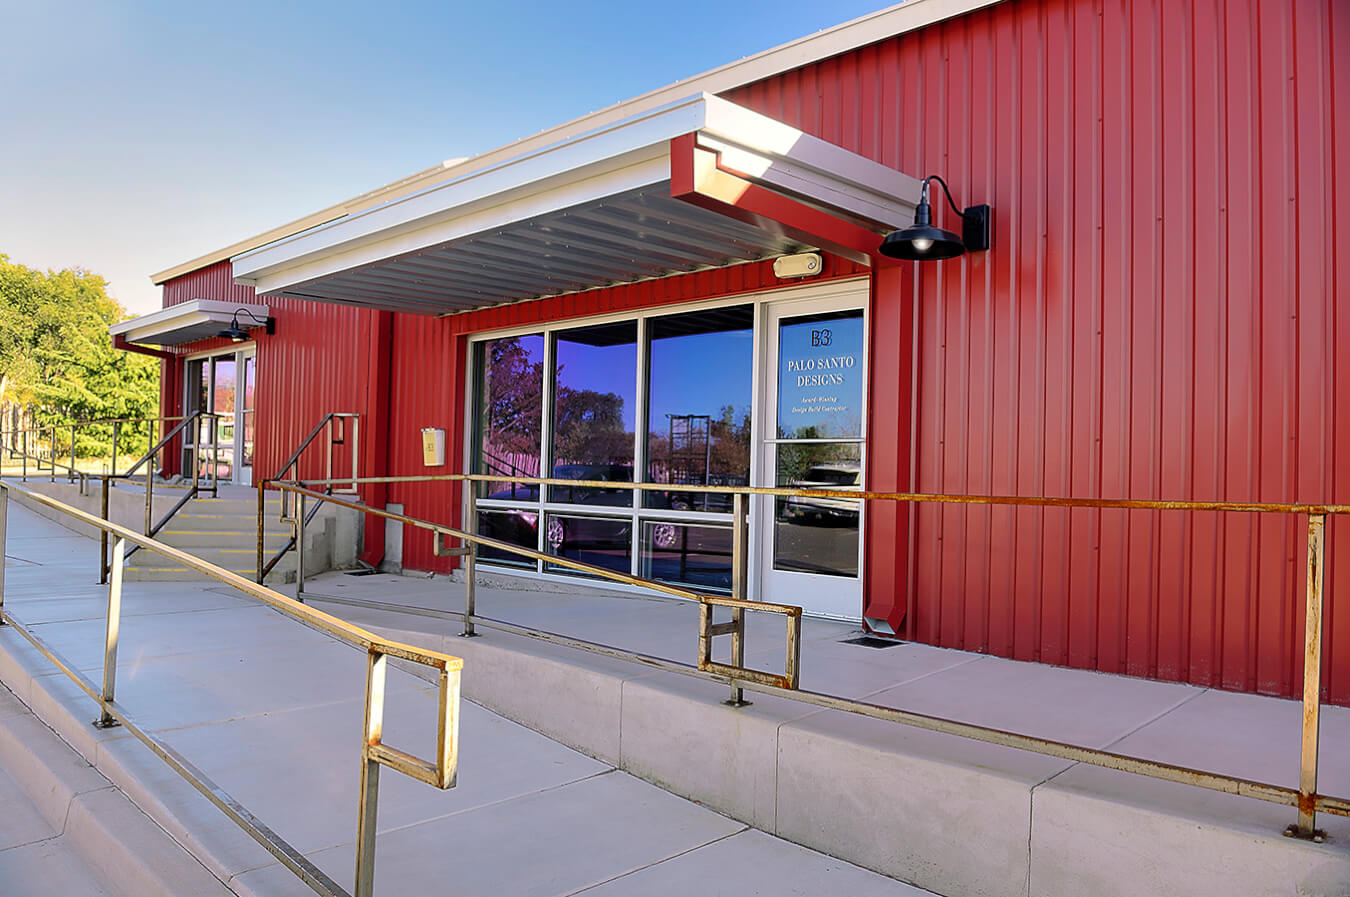 The Santa Fe-inspired entrance to a red building with metal railings, crafted by a skilled architect.